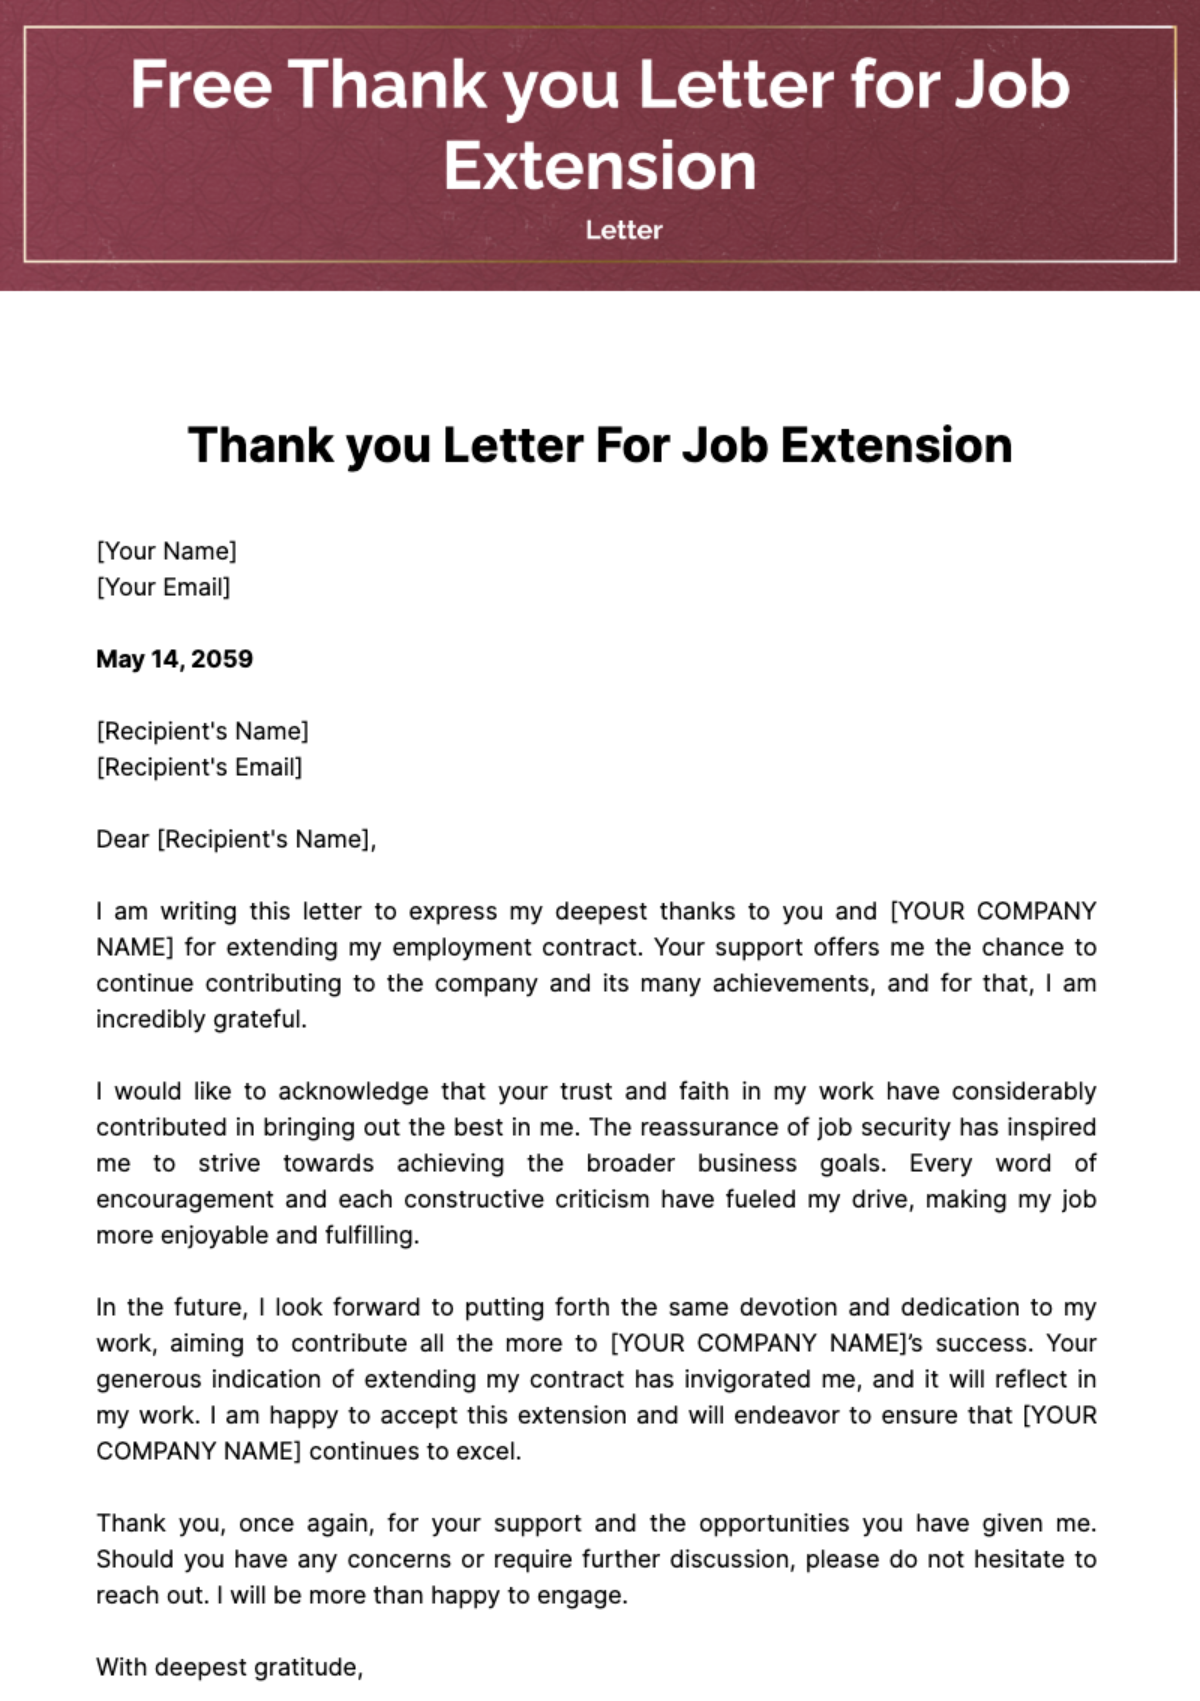 Thank you Letter for Job Extension Template